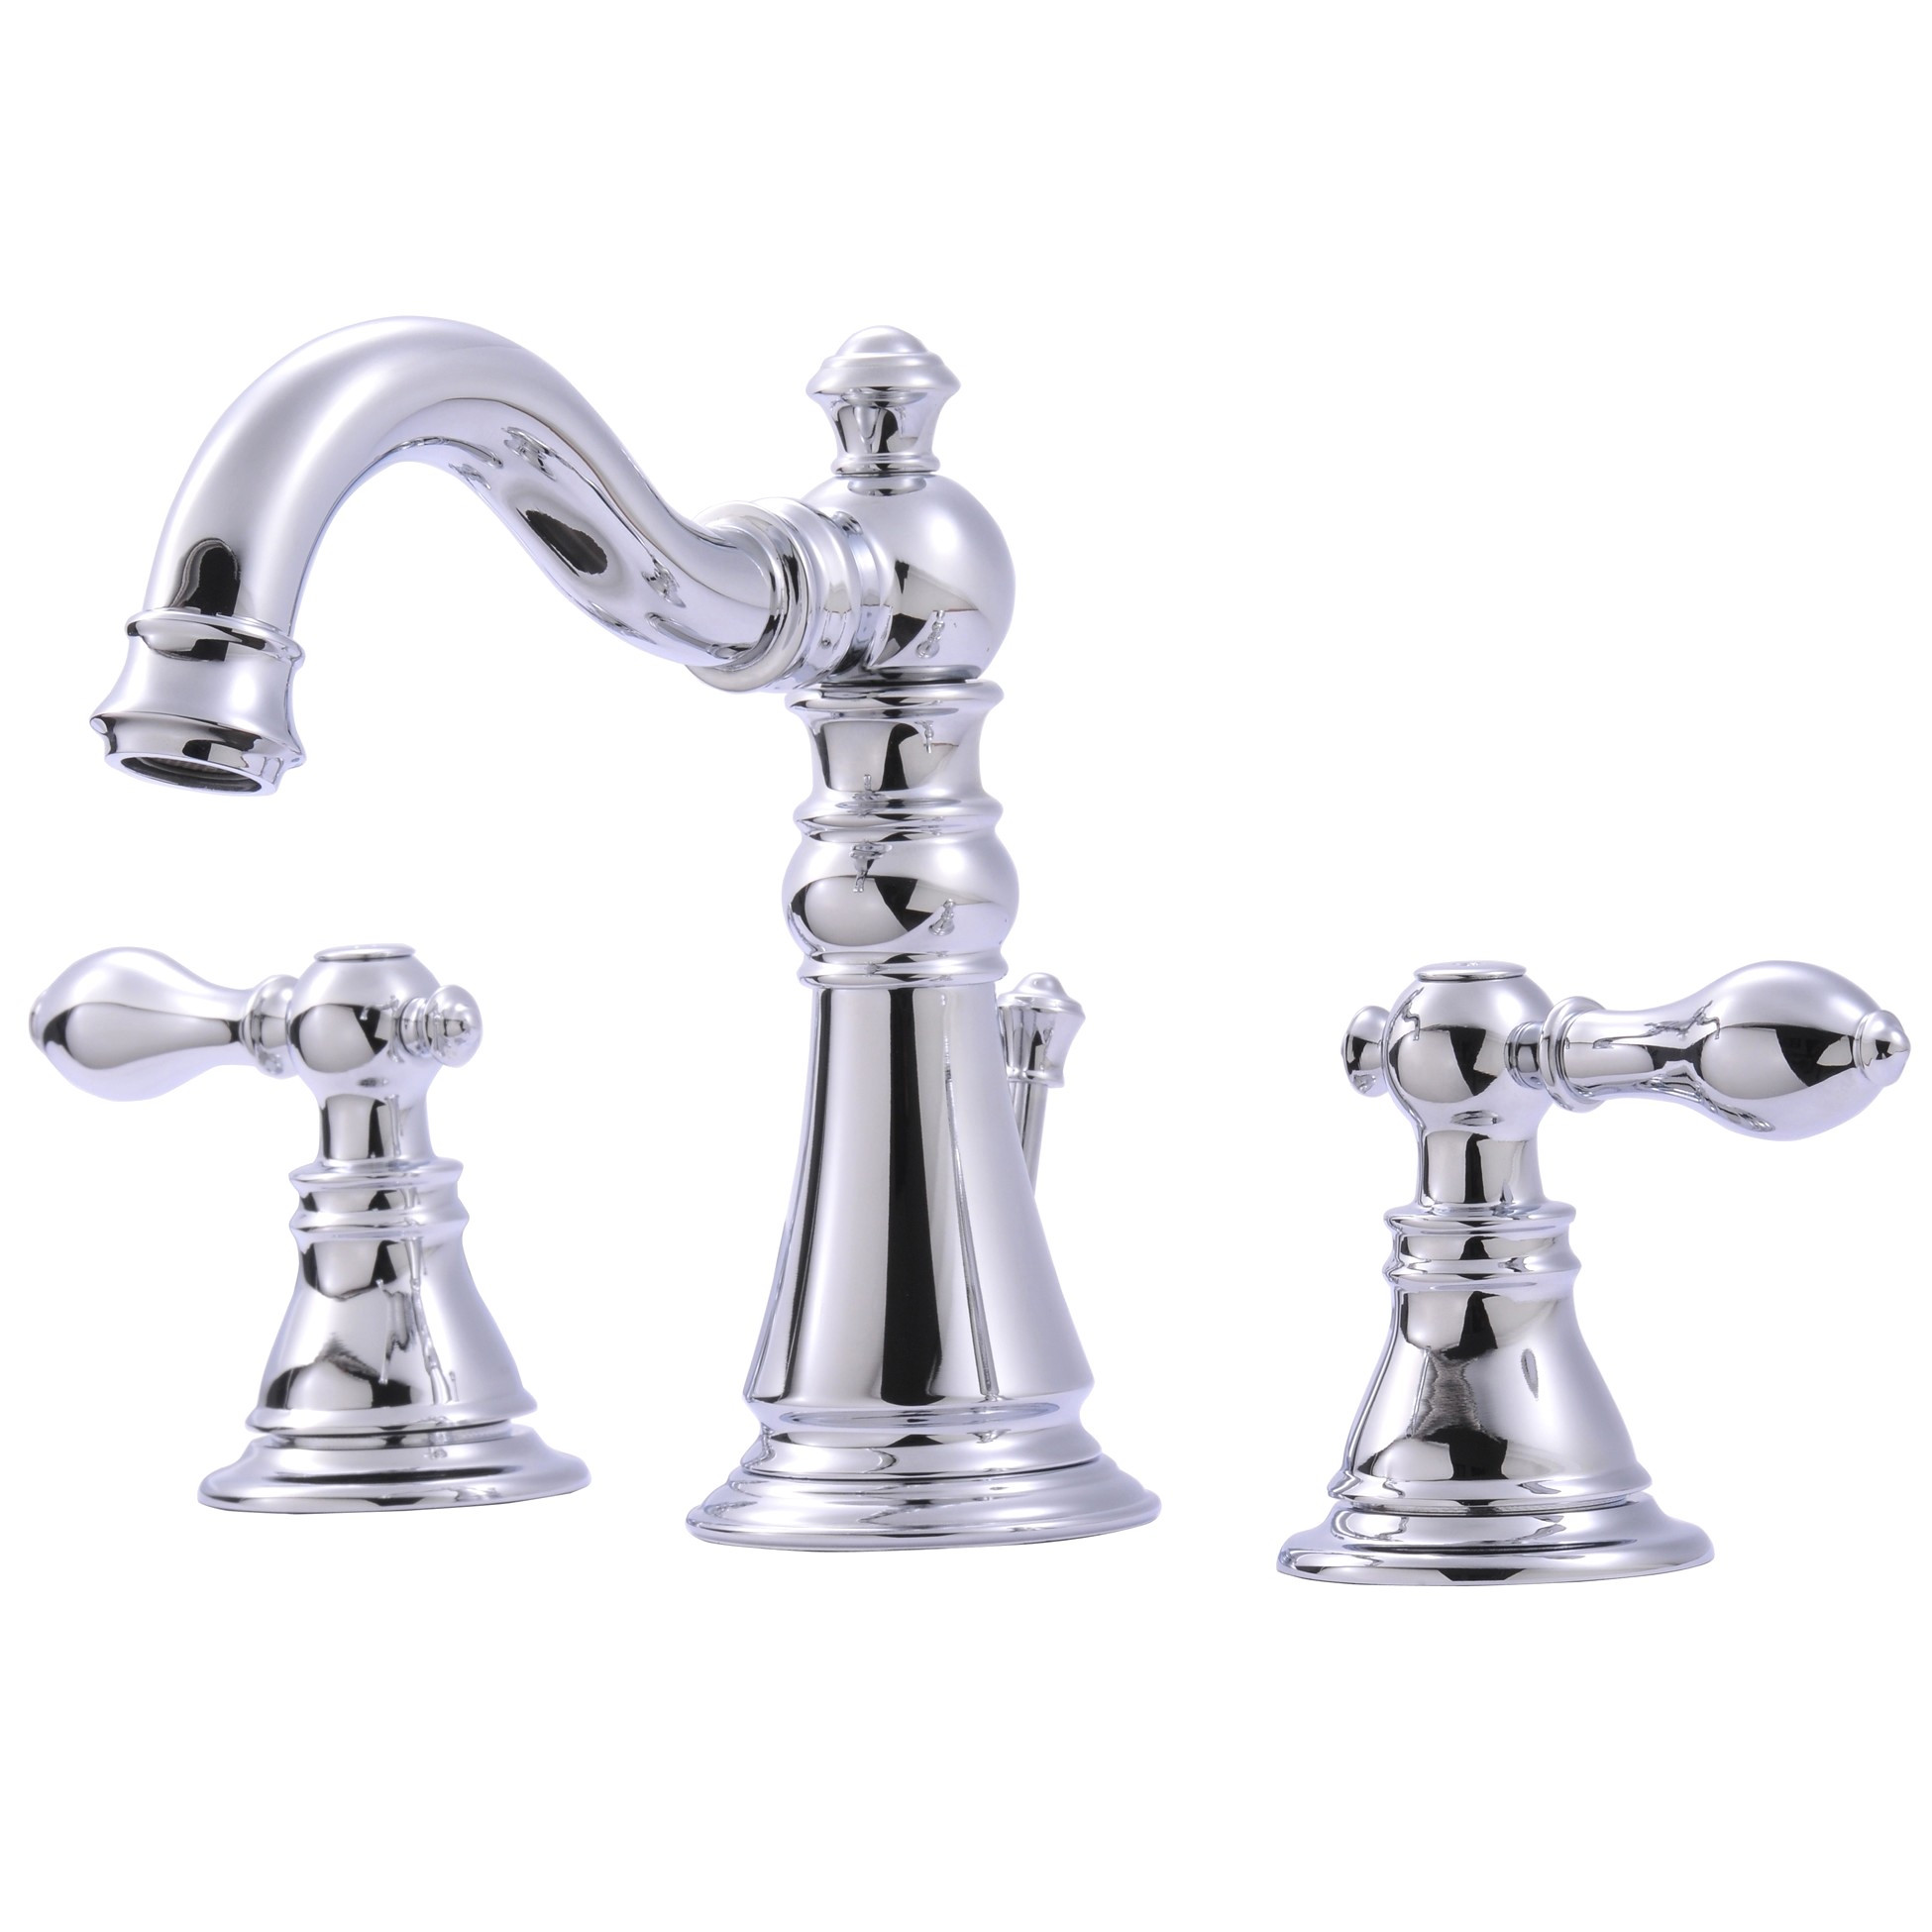 waterridge kitchen faucet parts awesome hansgrohe kitchen faucet parts fresh kitchen design h sink bathroom